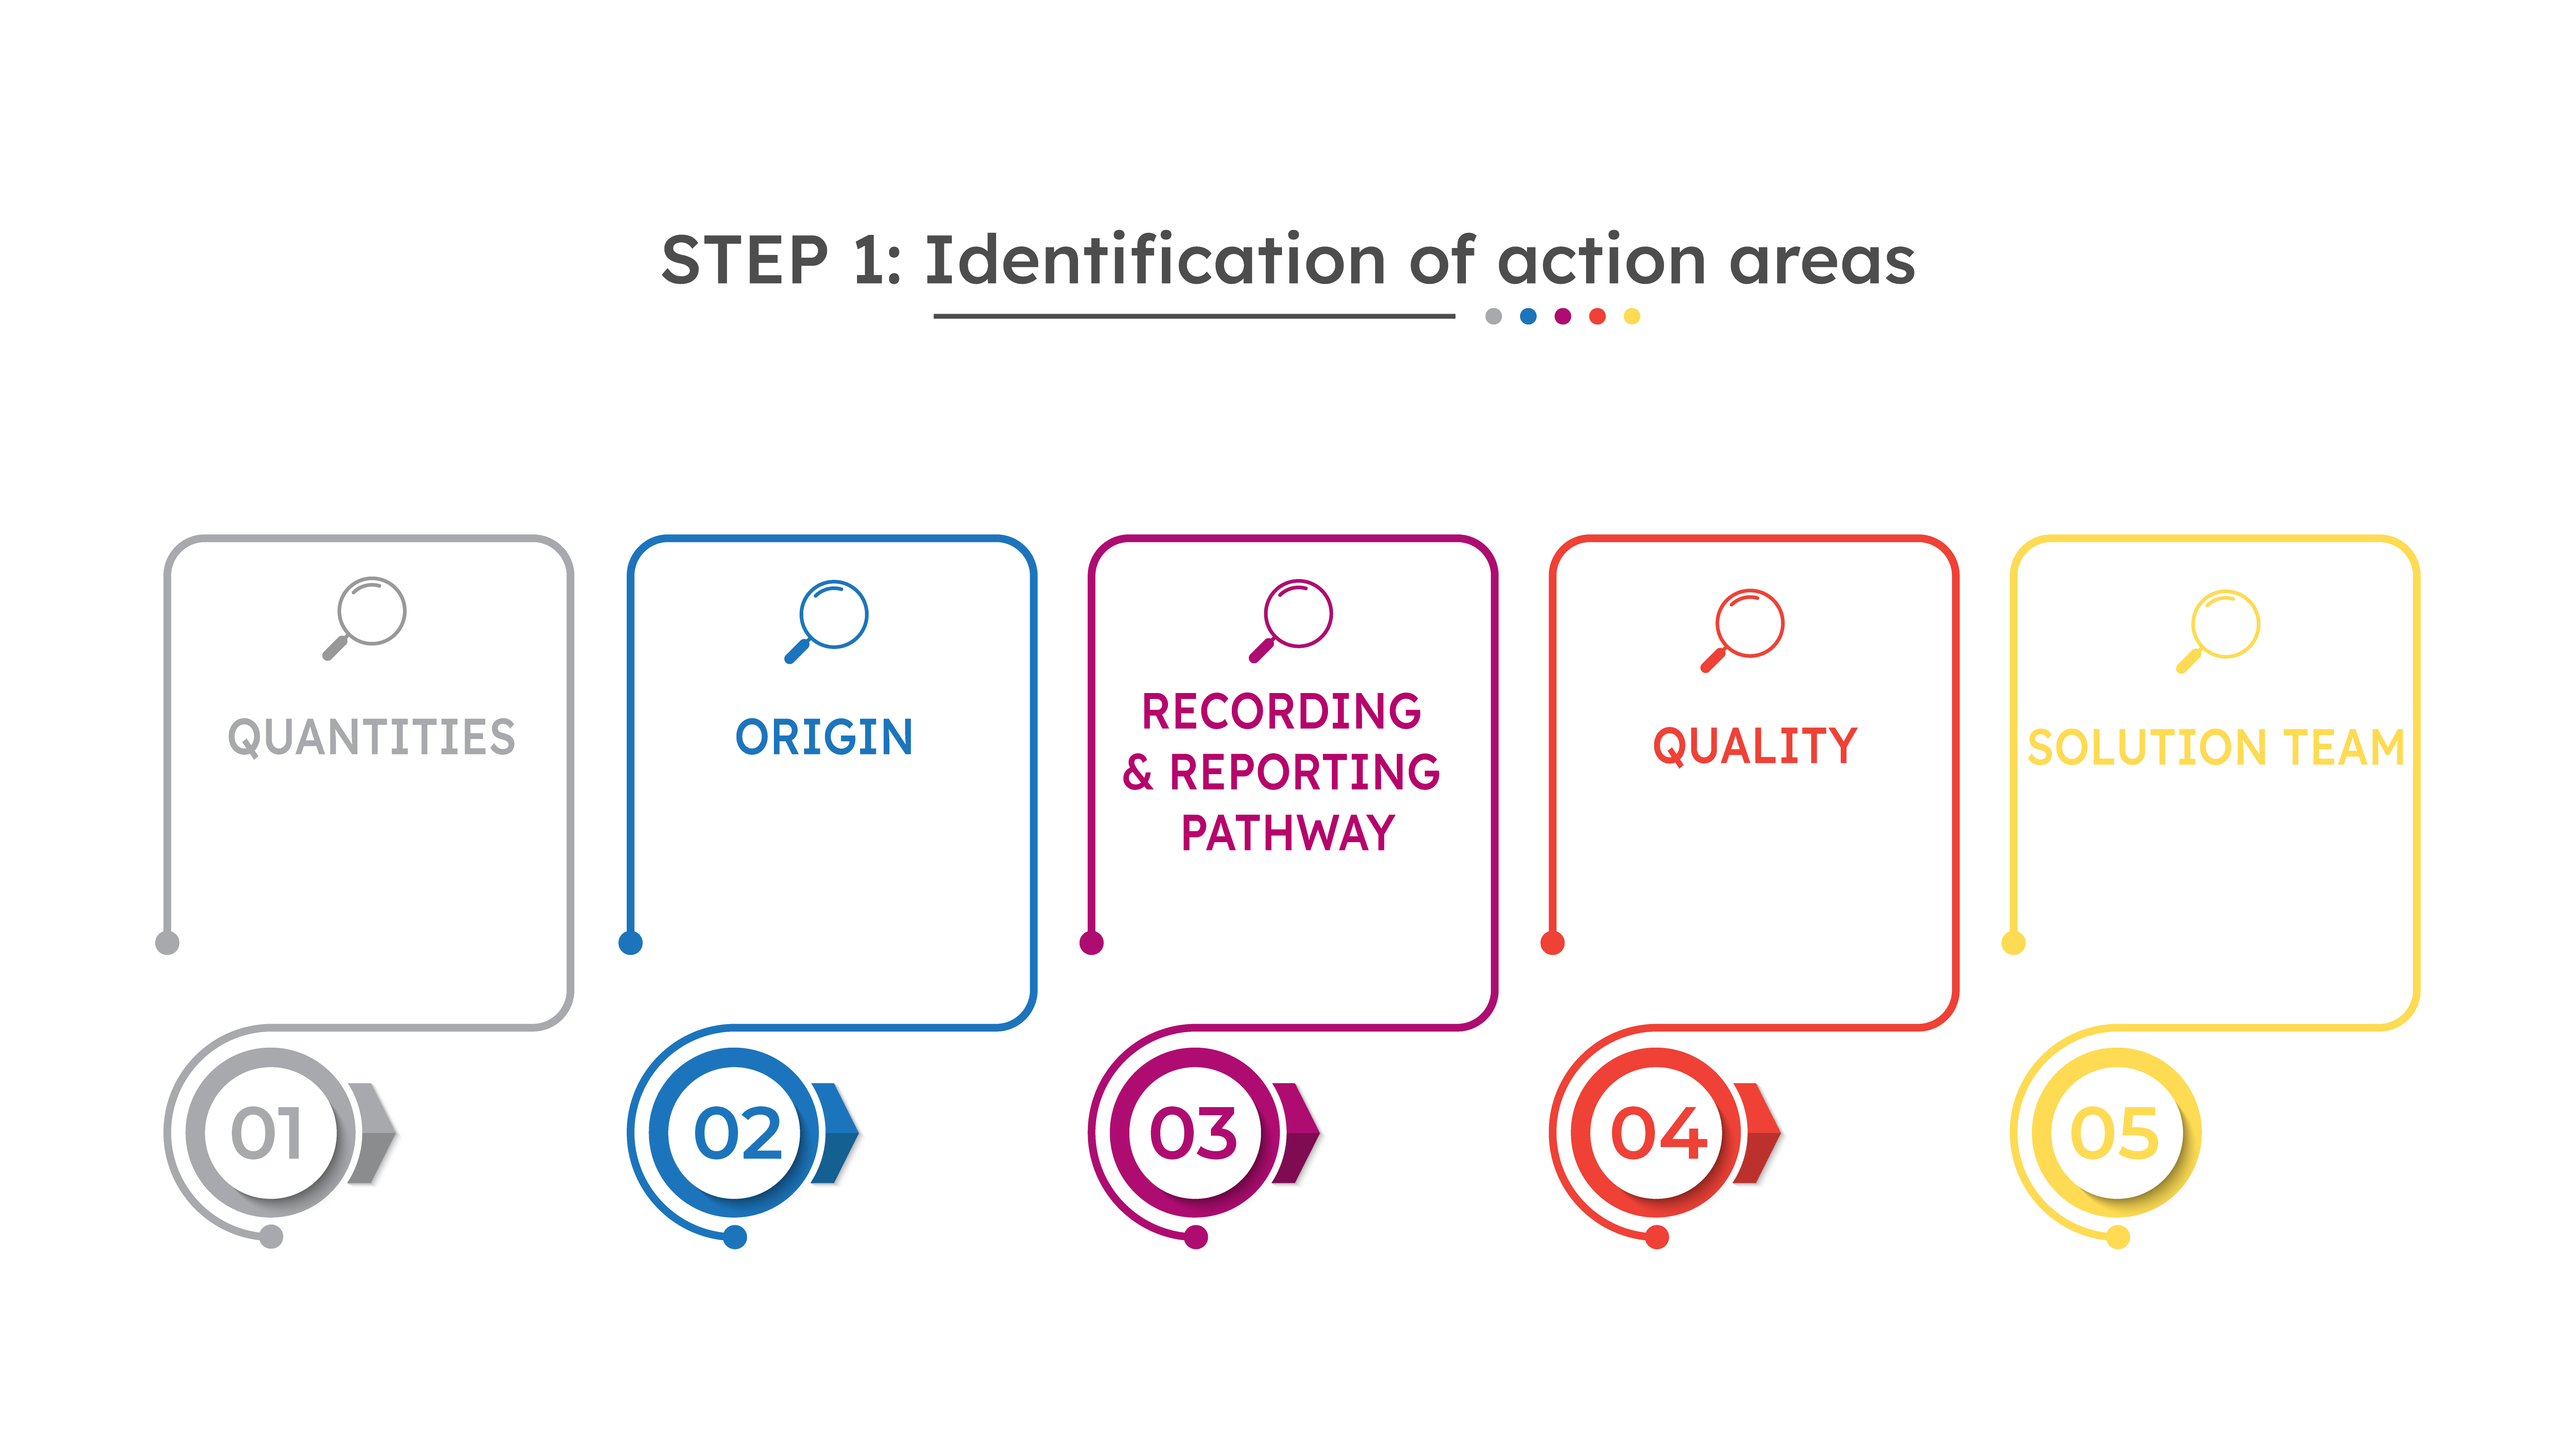  STEP 1 - IDENTIFY AREAS OF ACTION